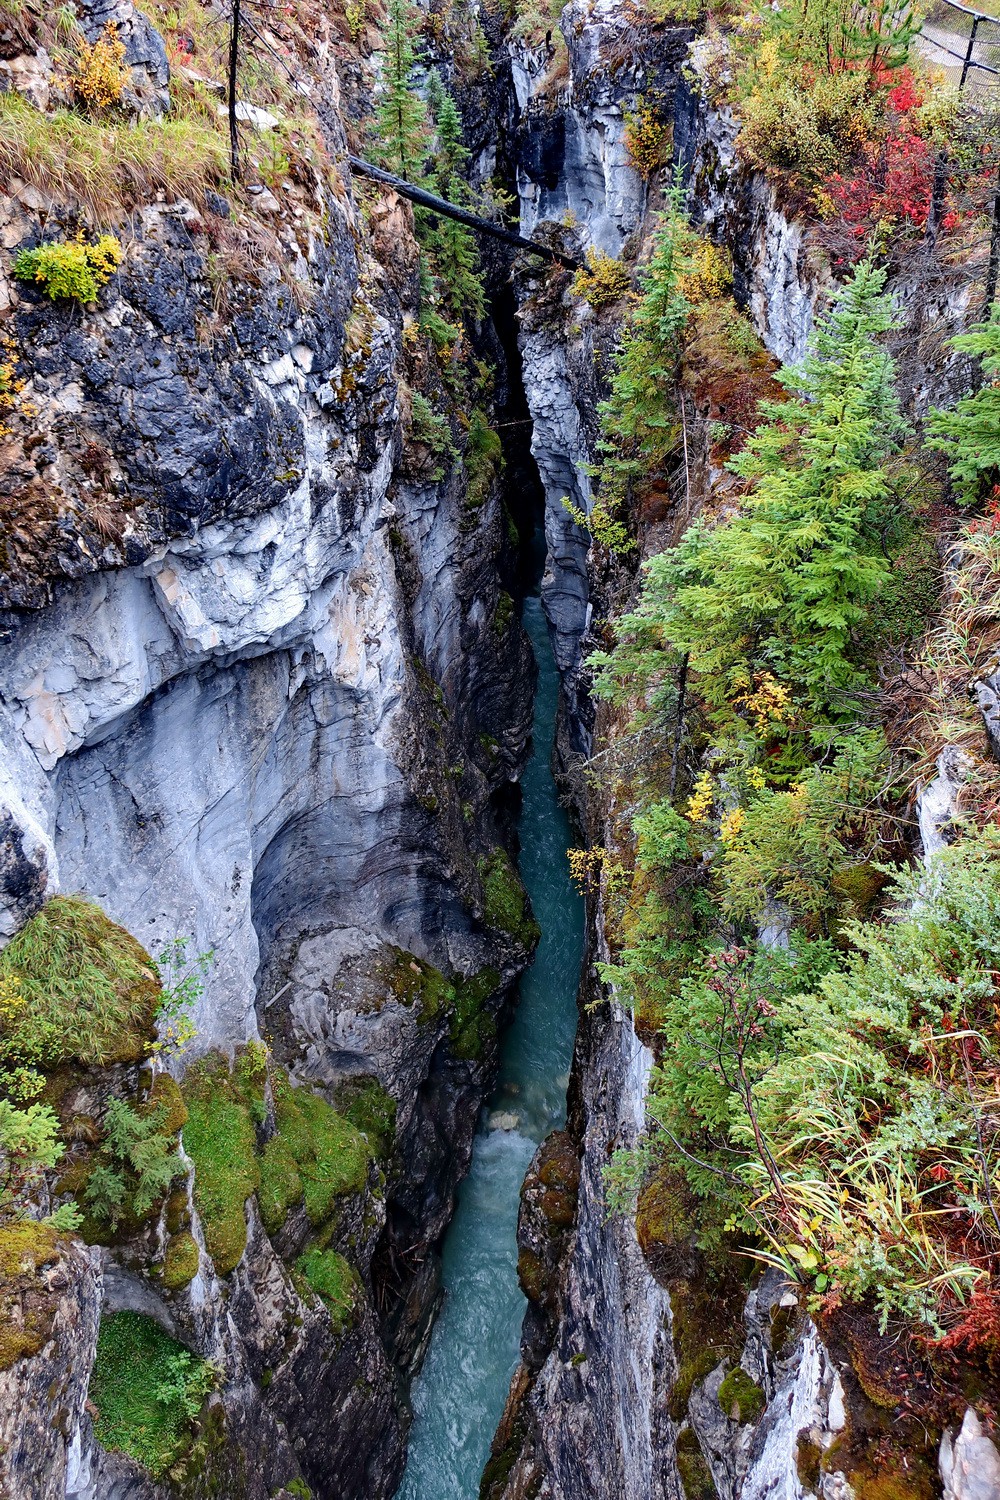 Marble Canyon in the Kootenay National Park